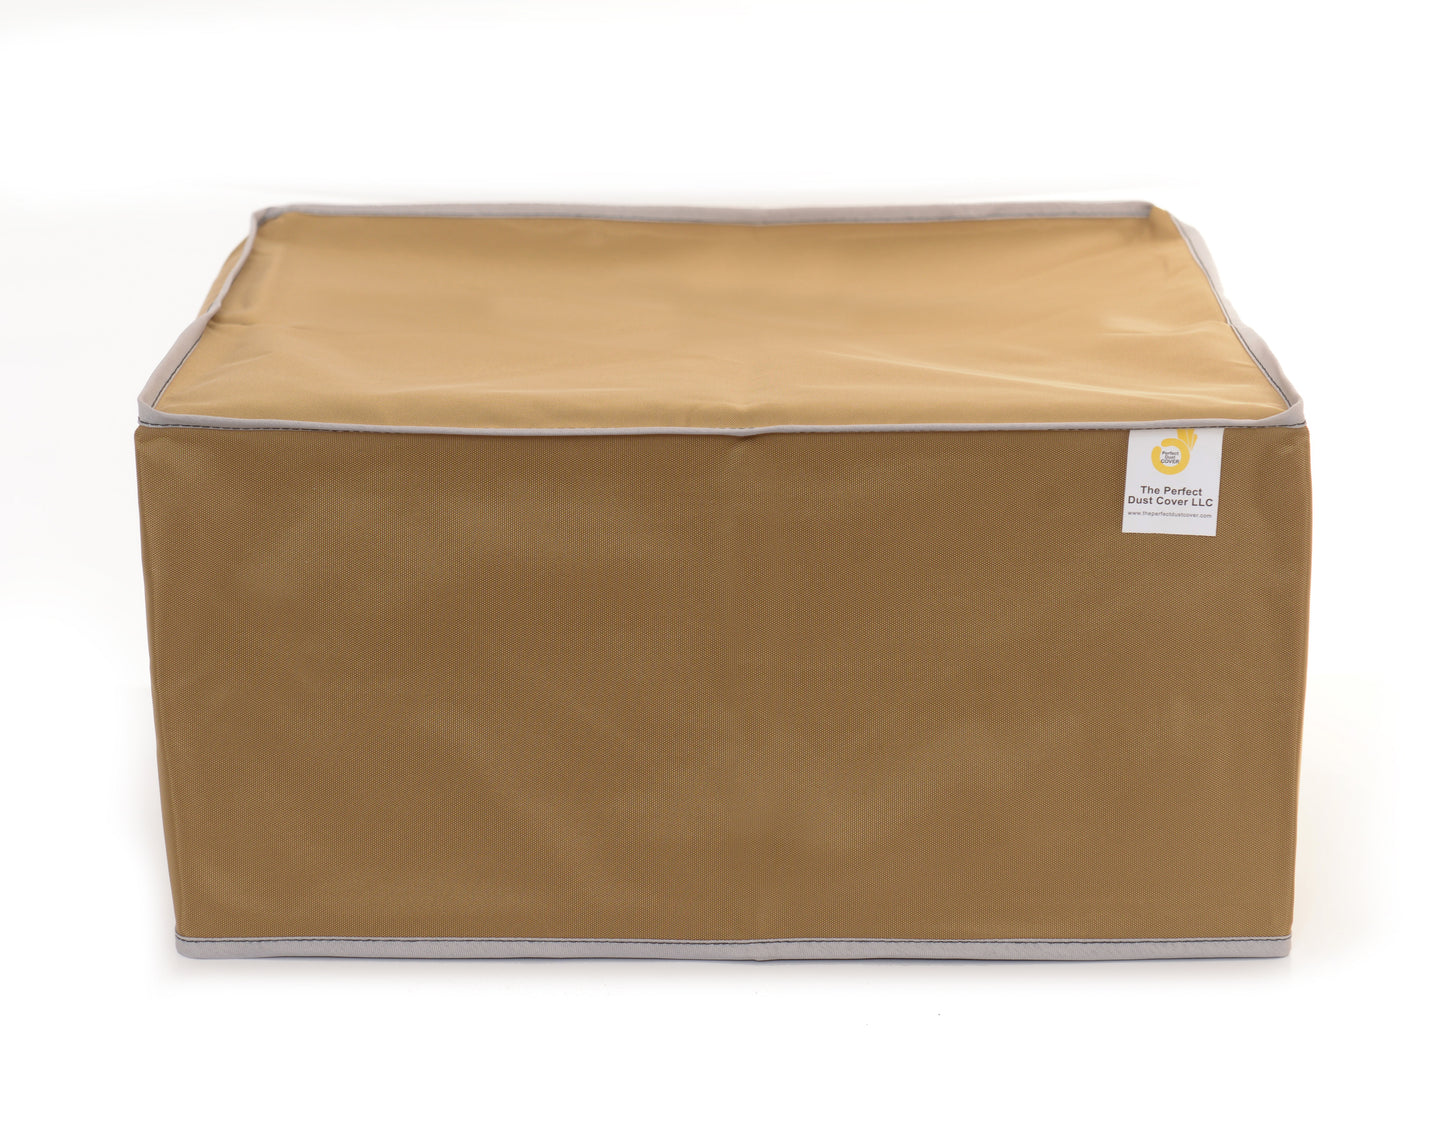 The Perfect Dust Cover, Tan Nylon Cover Compatible with Raise3D DF Cure 3D Printer, Anti Static, Double Stitched and Waterproof Dust Cover Dimensions 19.3''W x 15.7''D x 24''H by The Perfect Dust Cover LLC